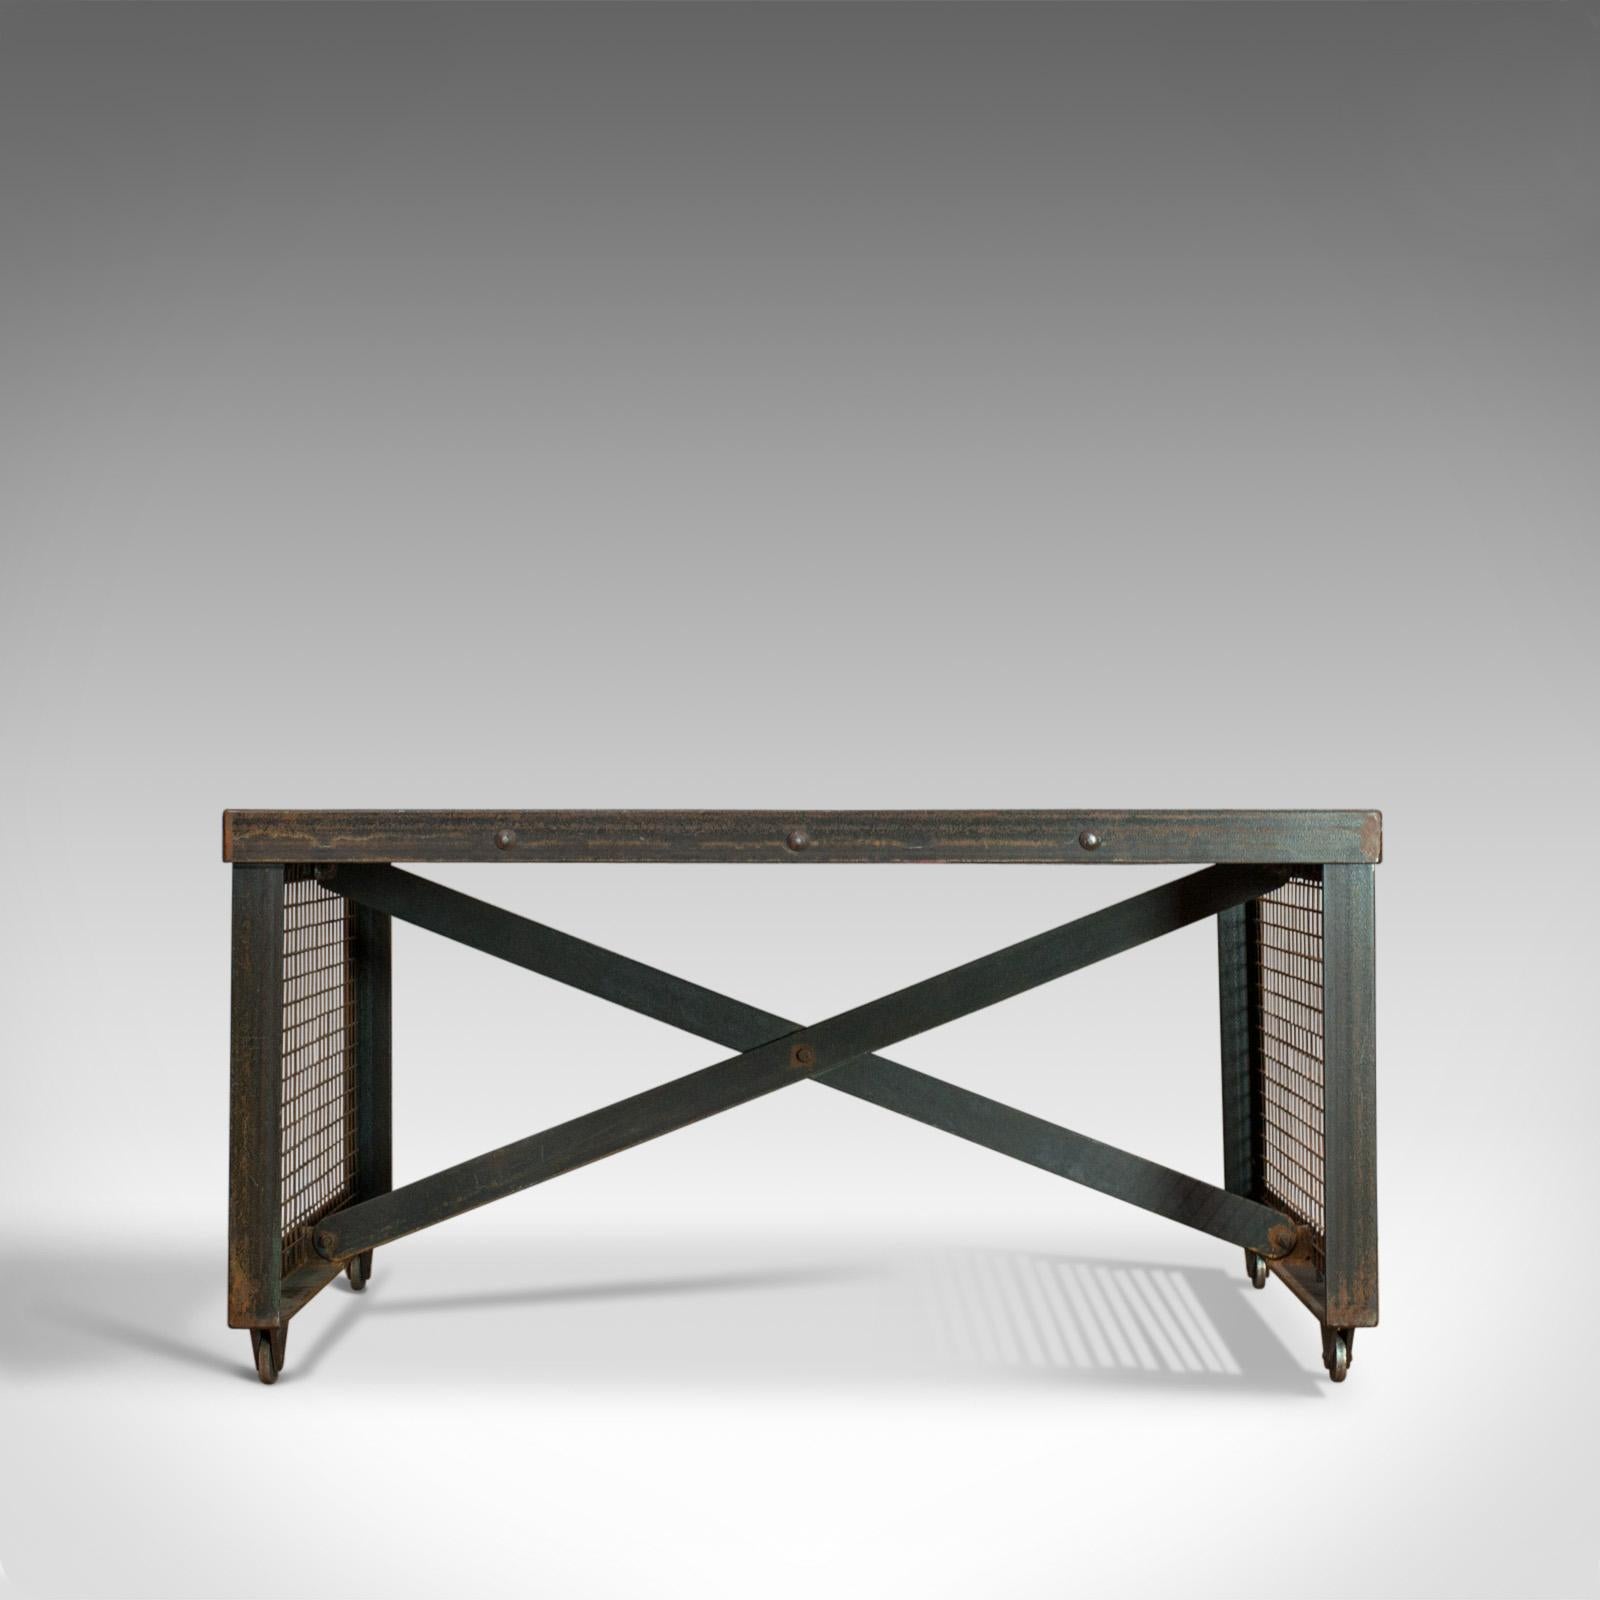 This is a vintage industrial coffee table. An English, steel and oak table dating to the 20th century.

Strong industrial taste with a desirable aged patina
Select cuts of weathered oak display a fine grain interest
Exposed welds at each corner